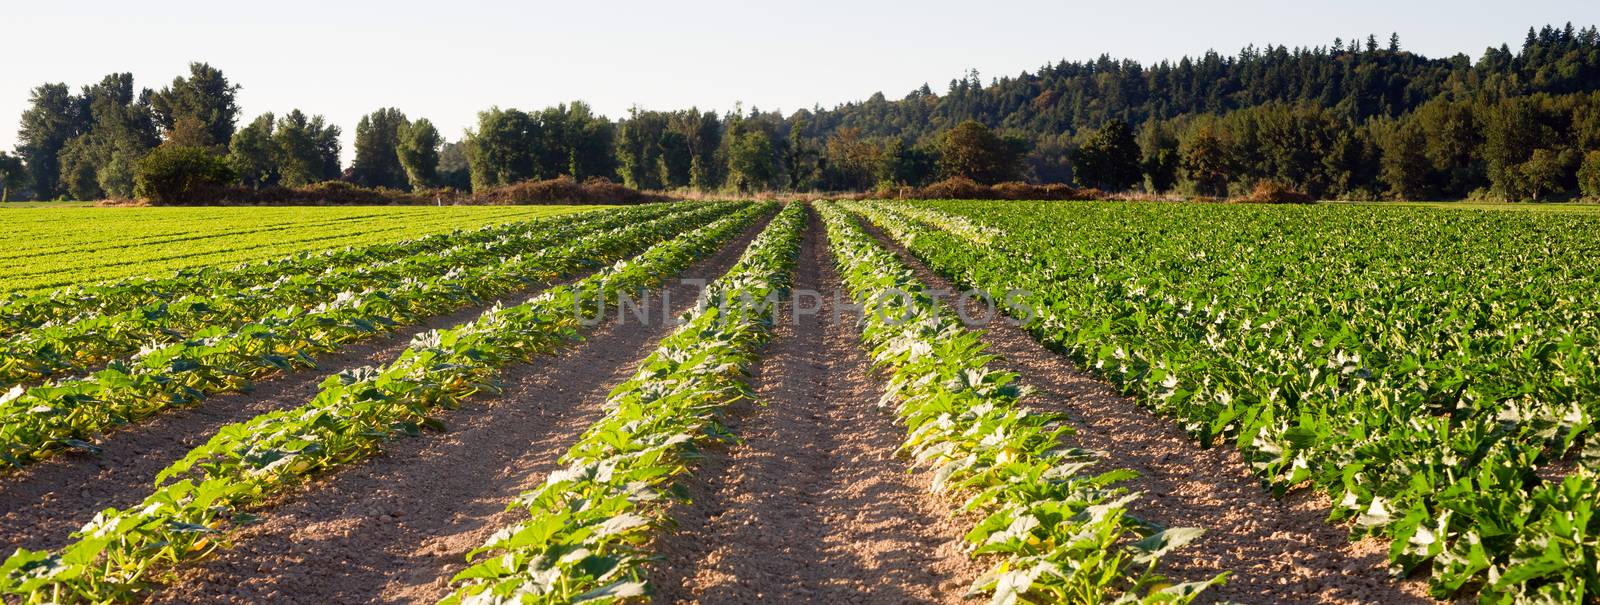 Planted Rows Herb Farm Agricultural Field Plant Crop by ChrisBoswell